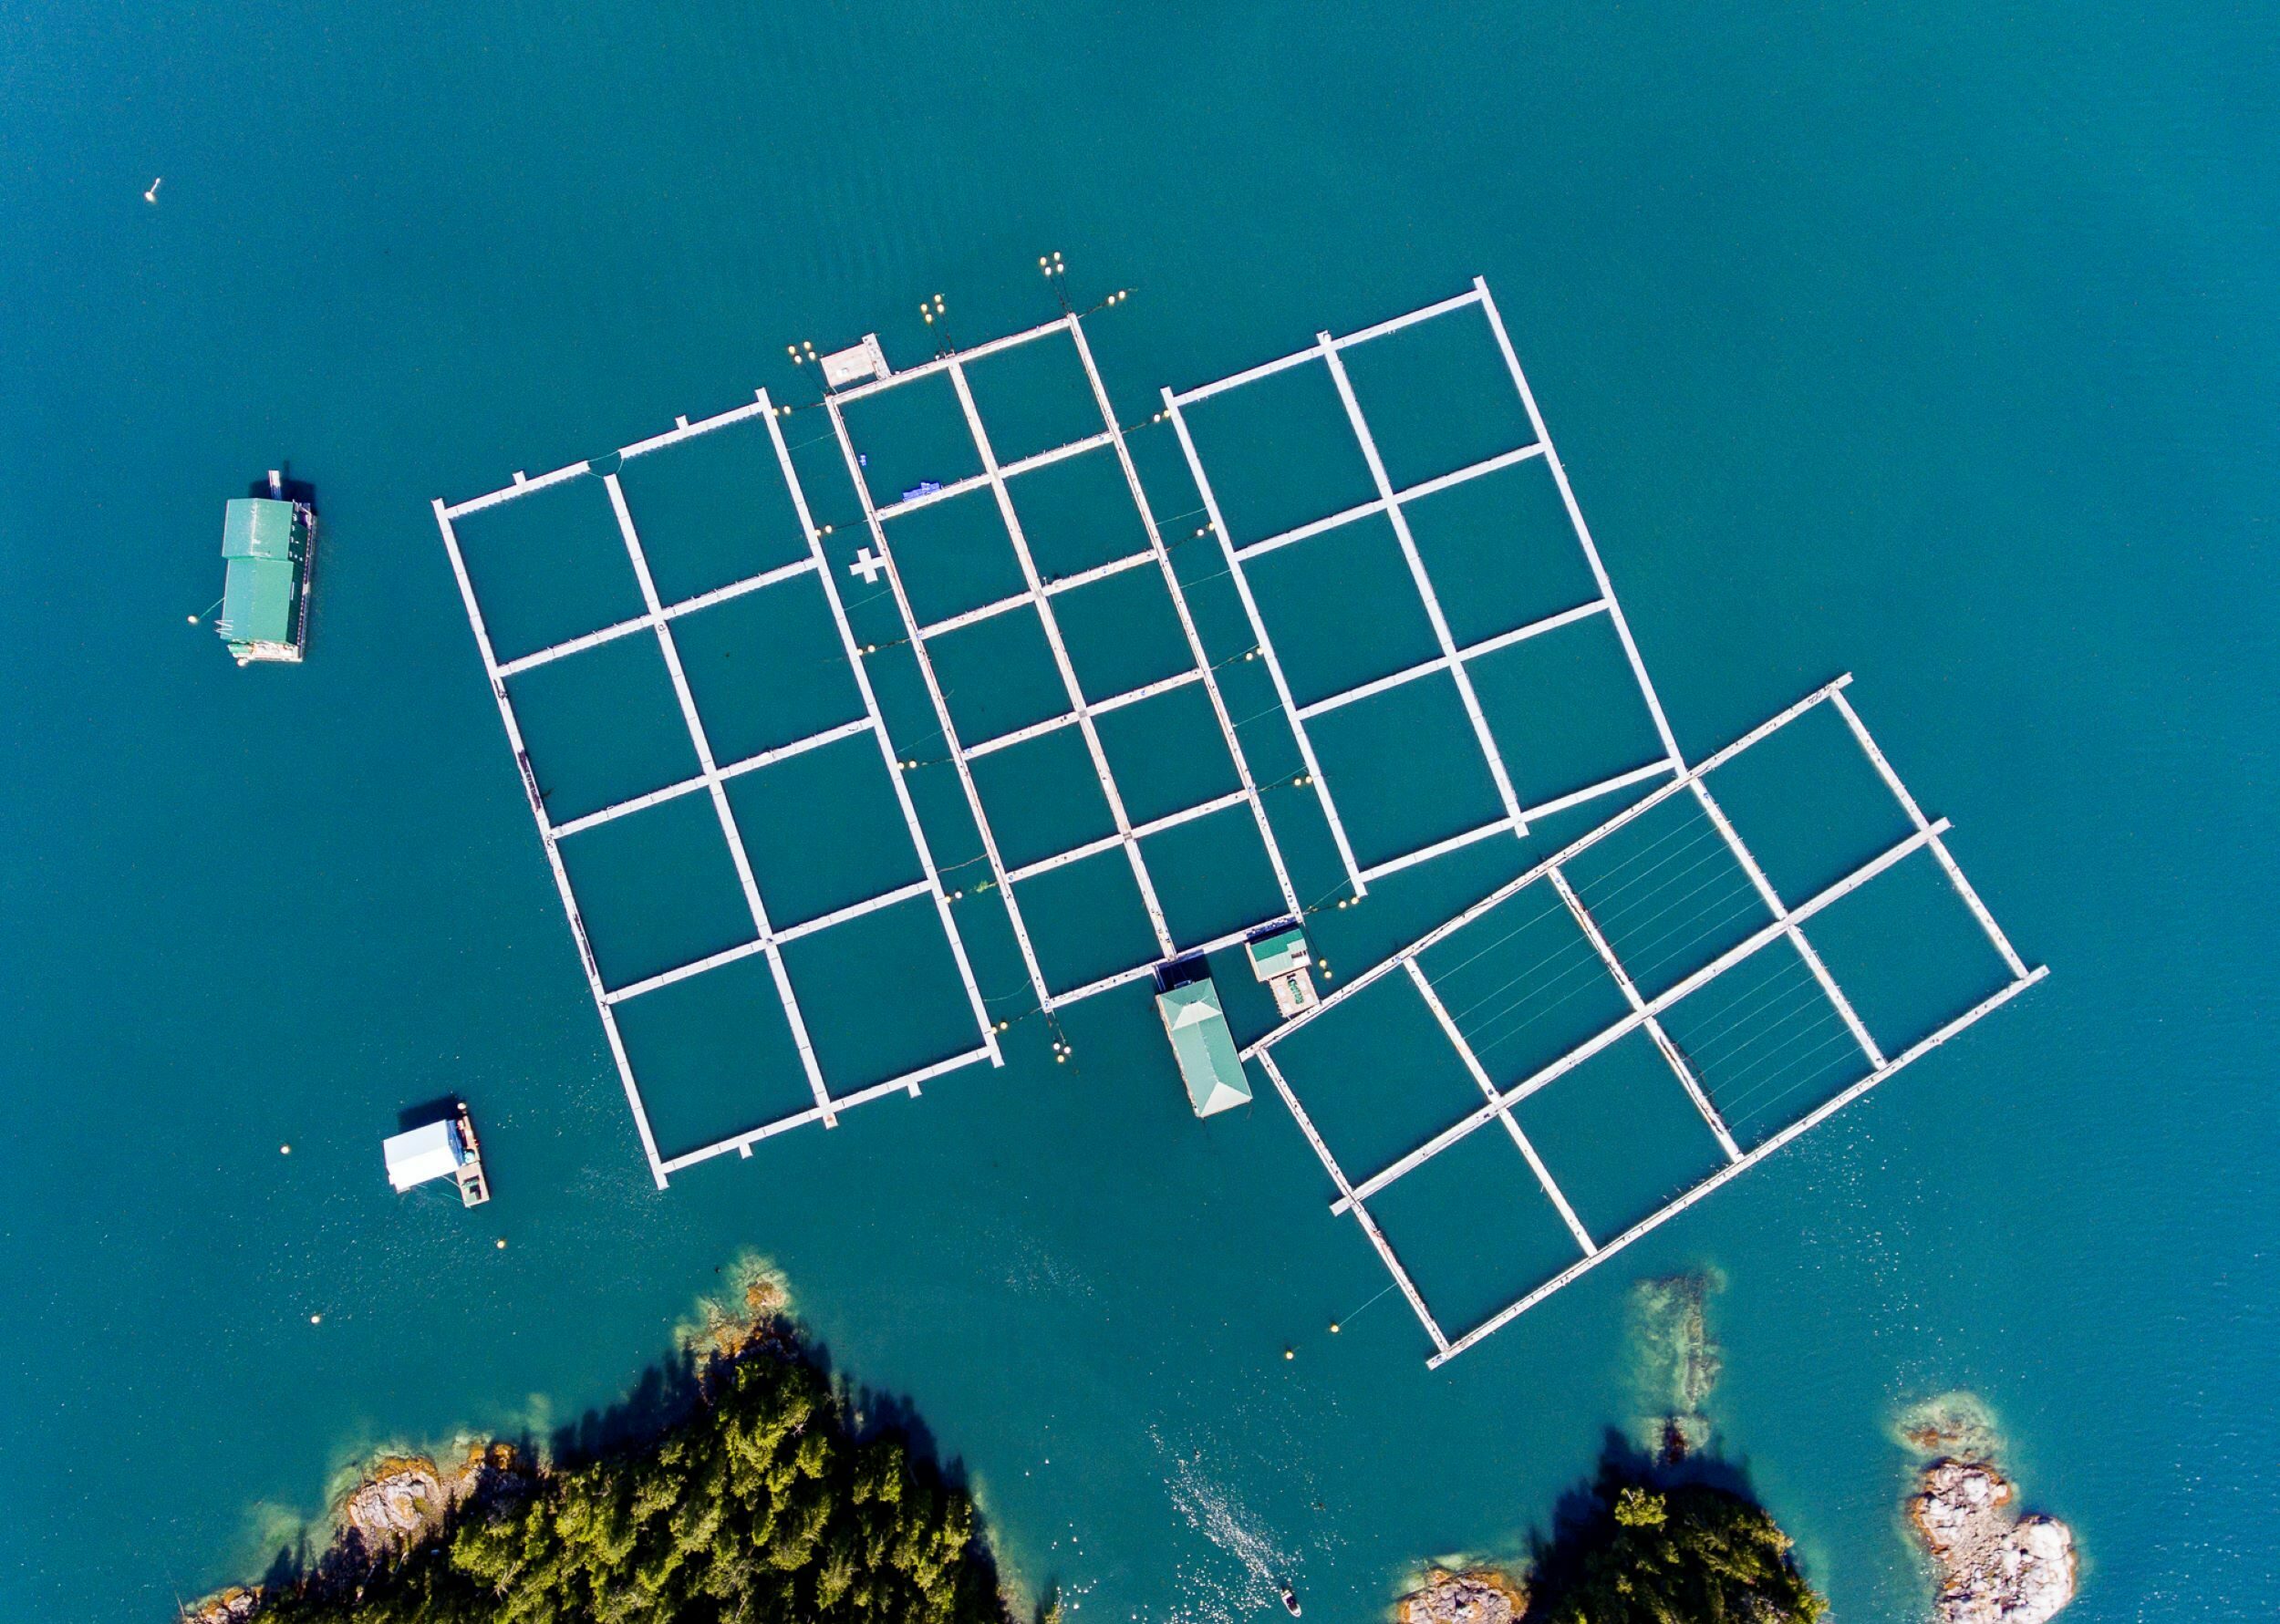 Fish farm in B.C. viewed from above, showing a series of enclosure that appear as four white grids against turquoise-blue water. Four small green-roofed buildings float nearby.